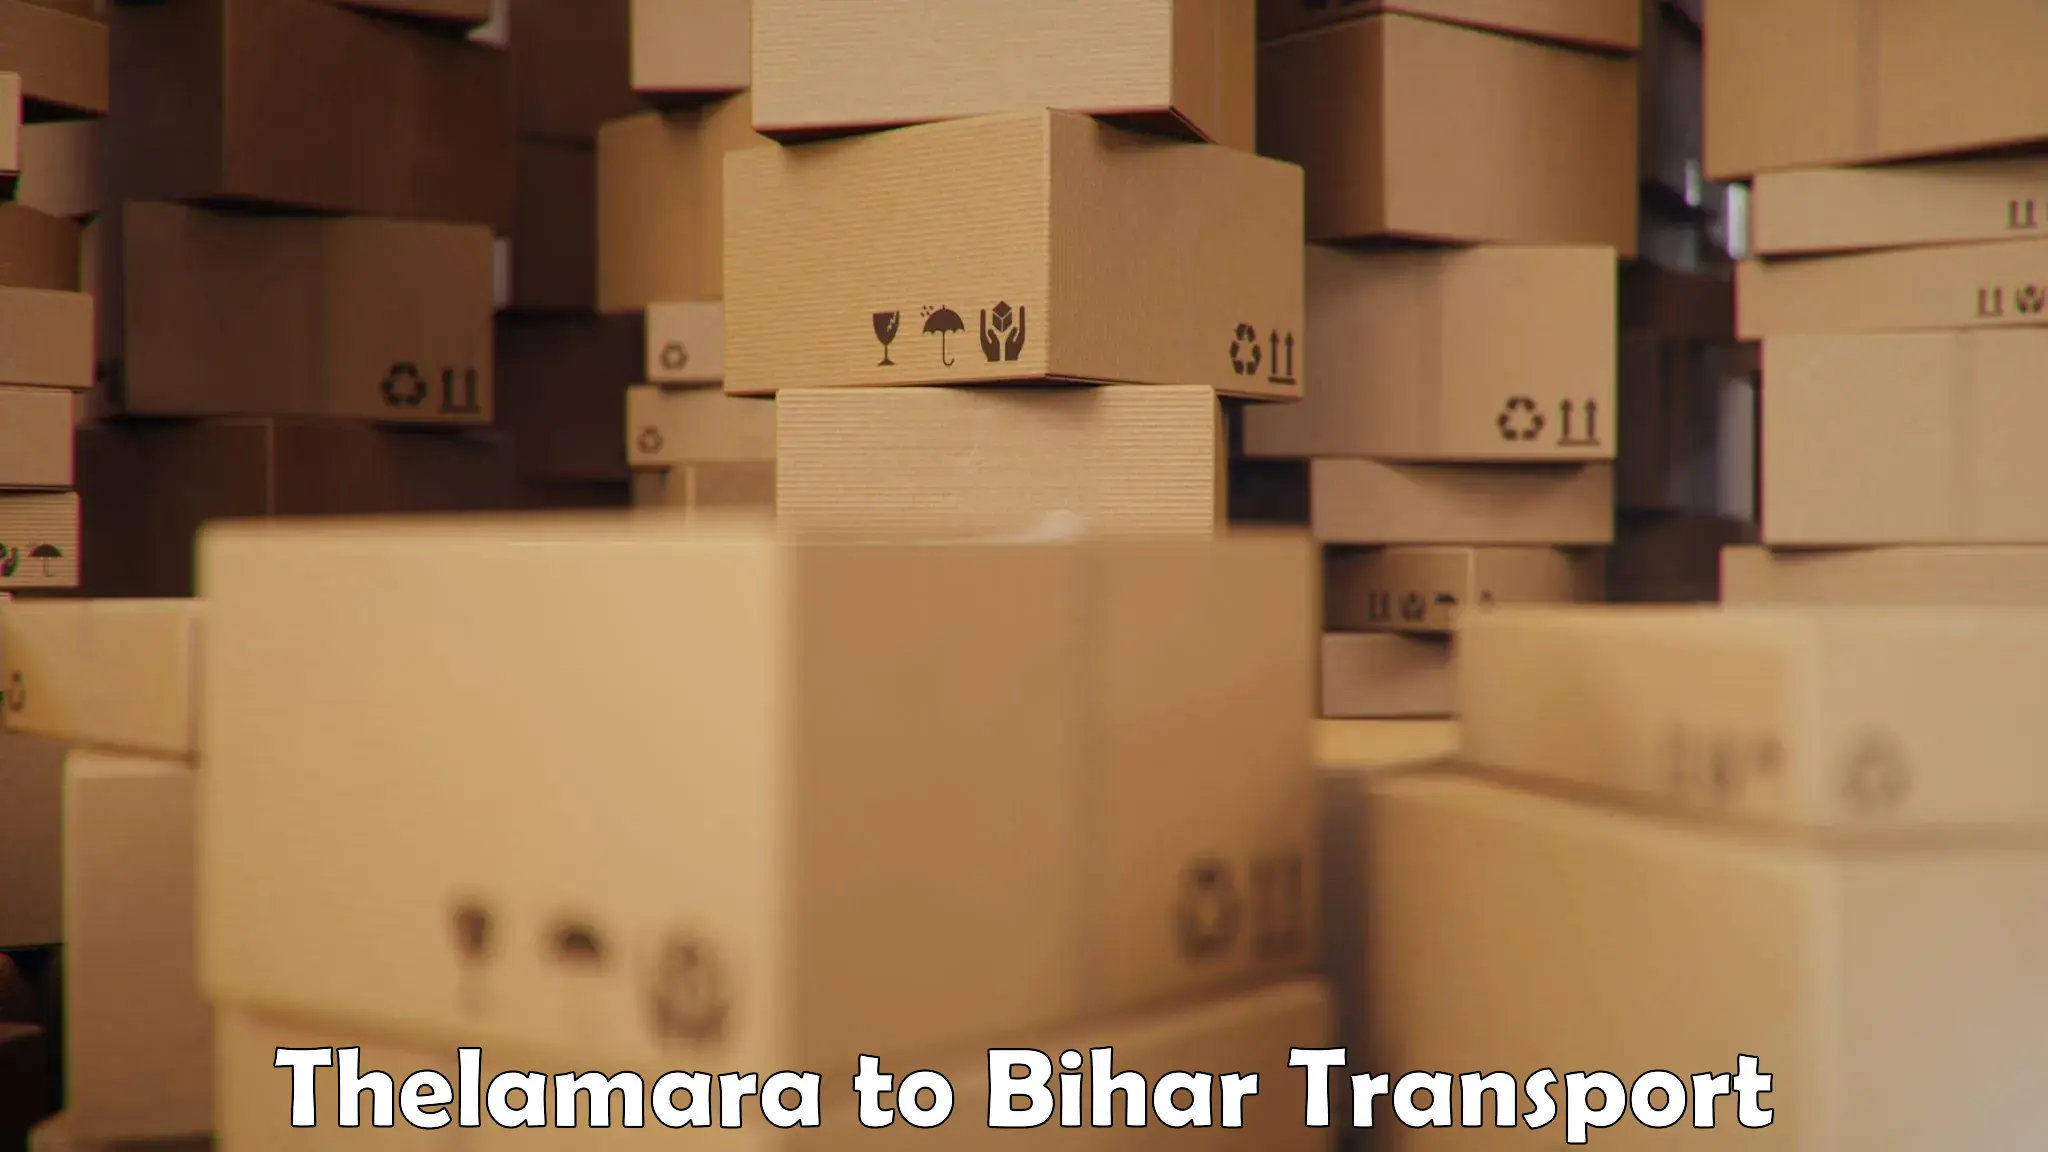 Cargo transport services in Thelamara to Patna